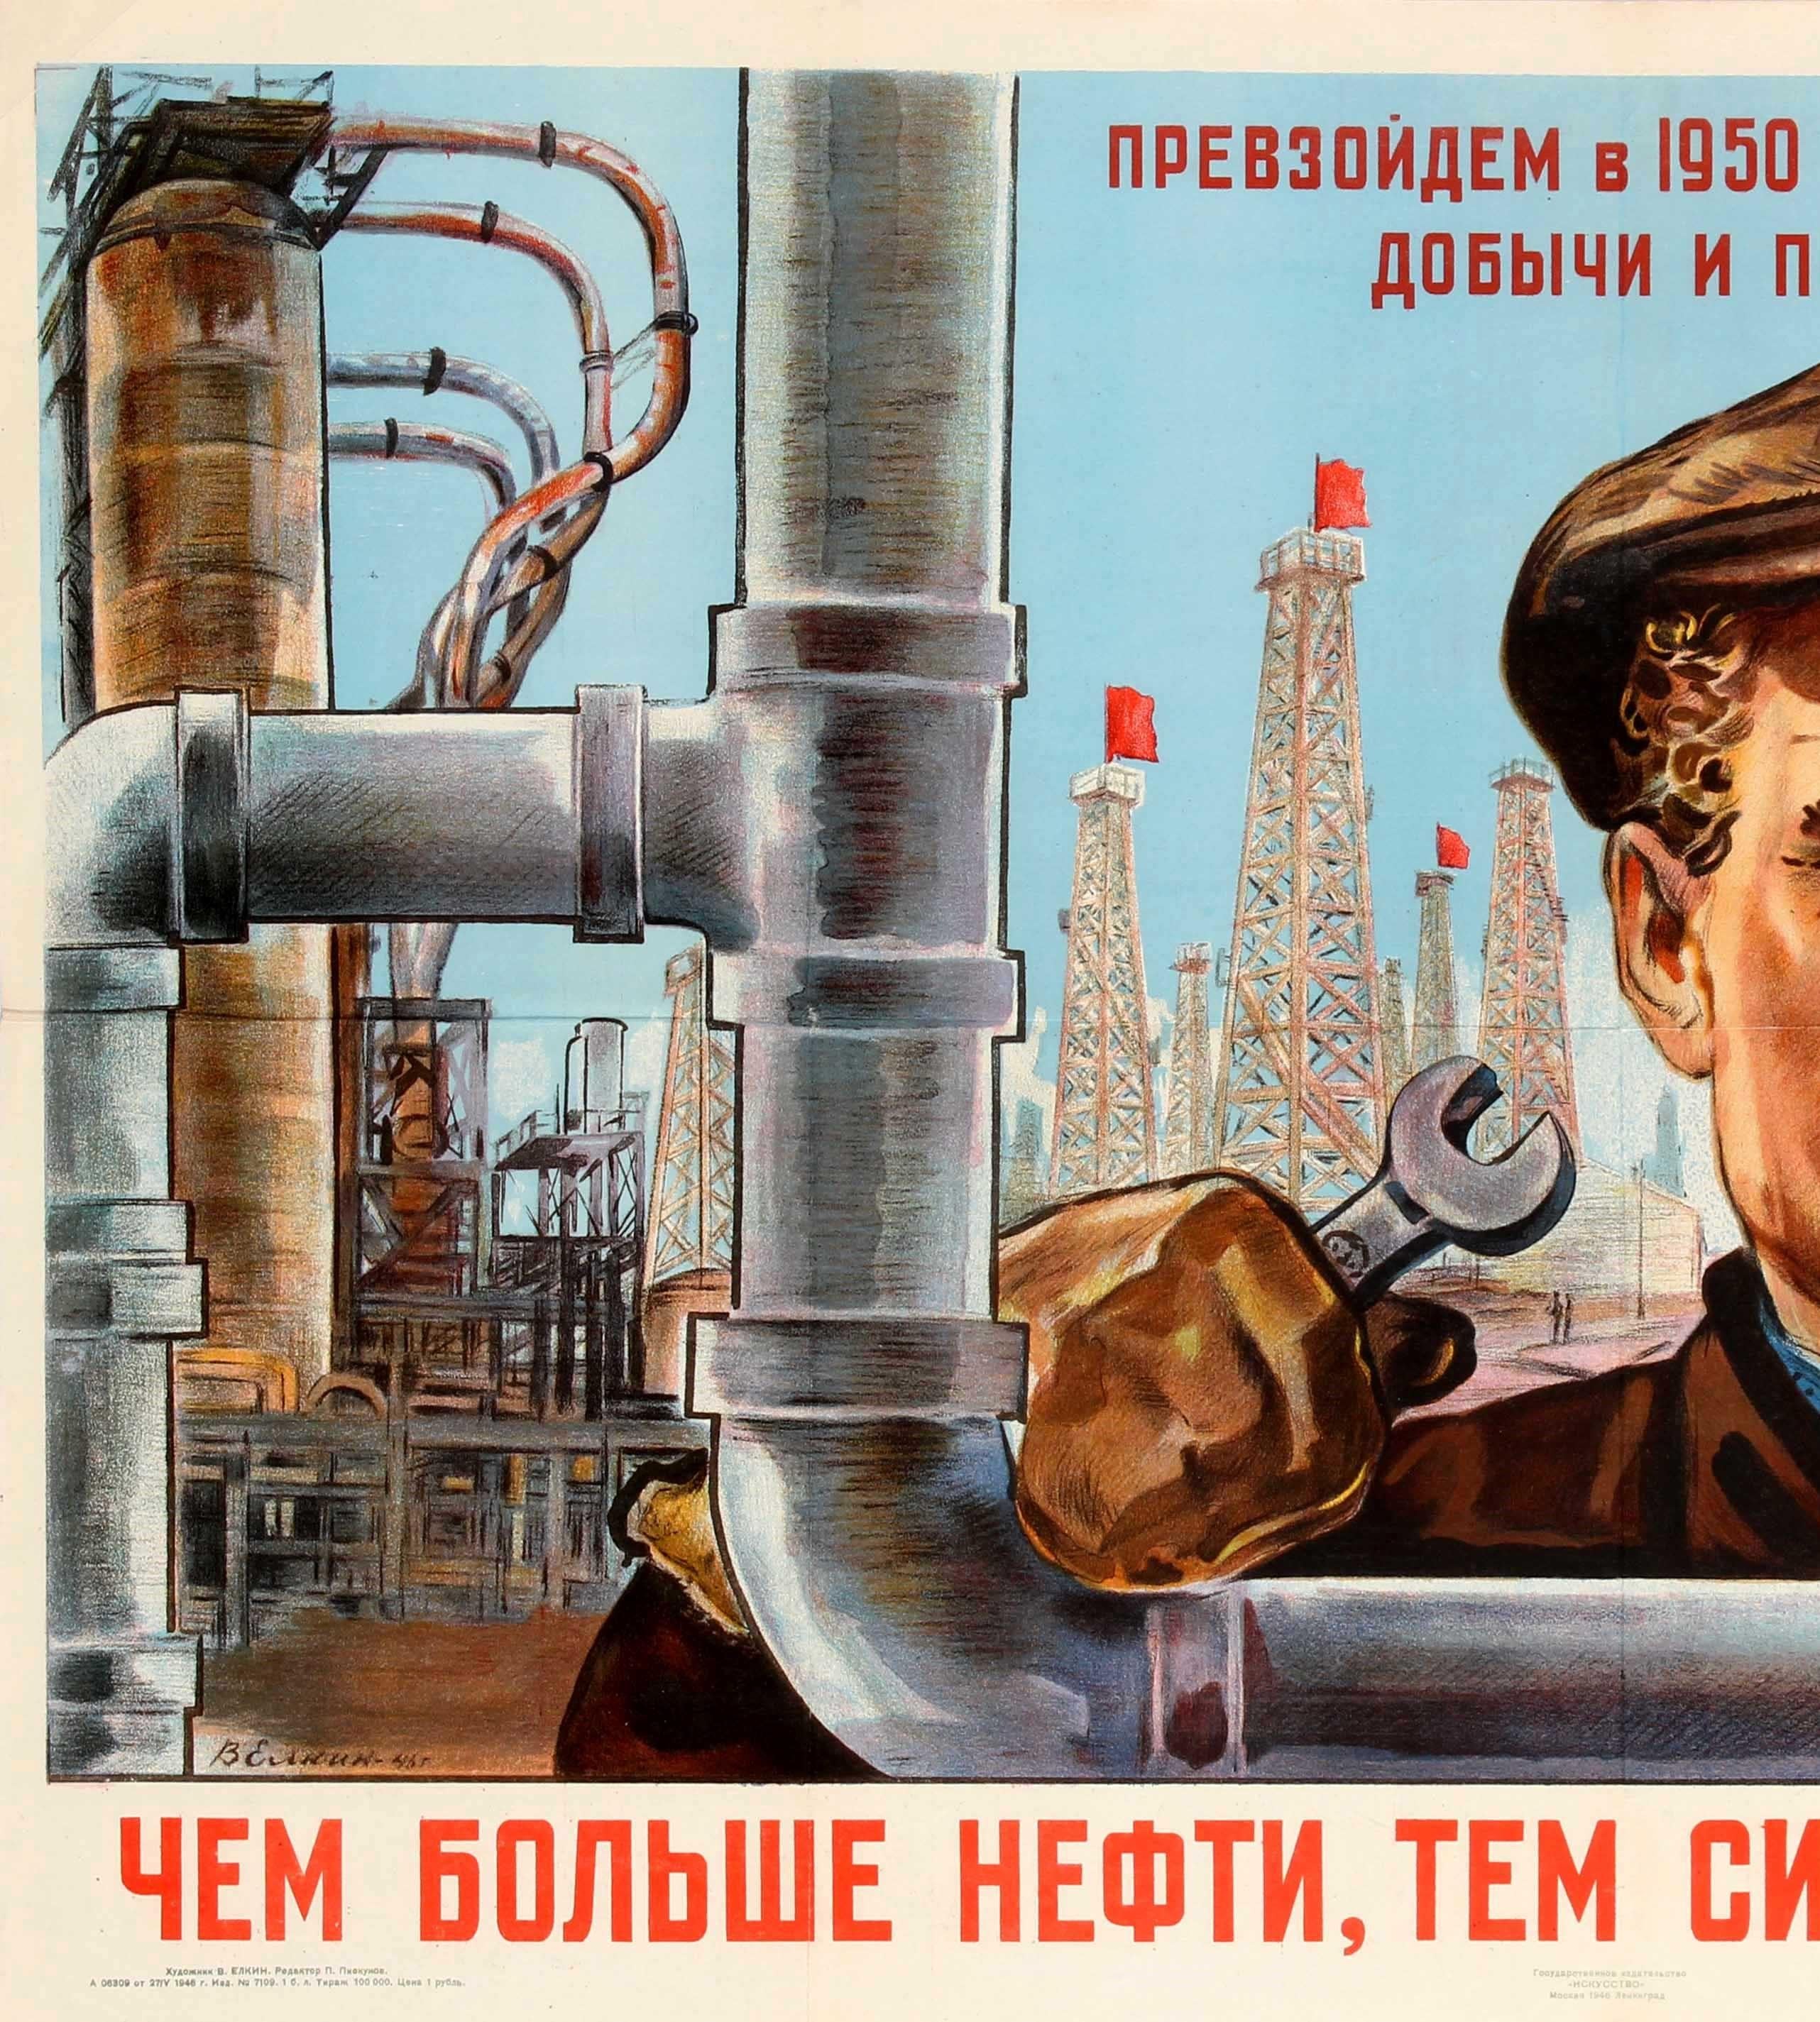 Original vintage USSR propaganda poster promoting growth in the production of oil and petrochemicals 